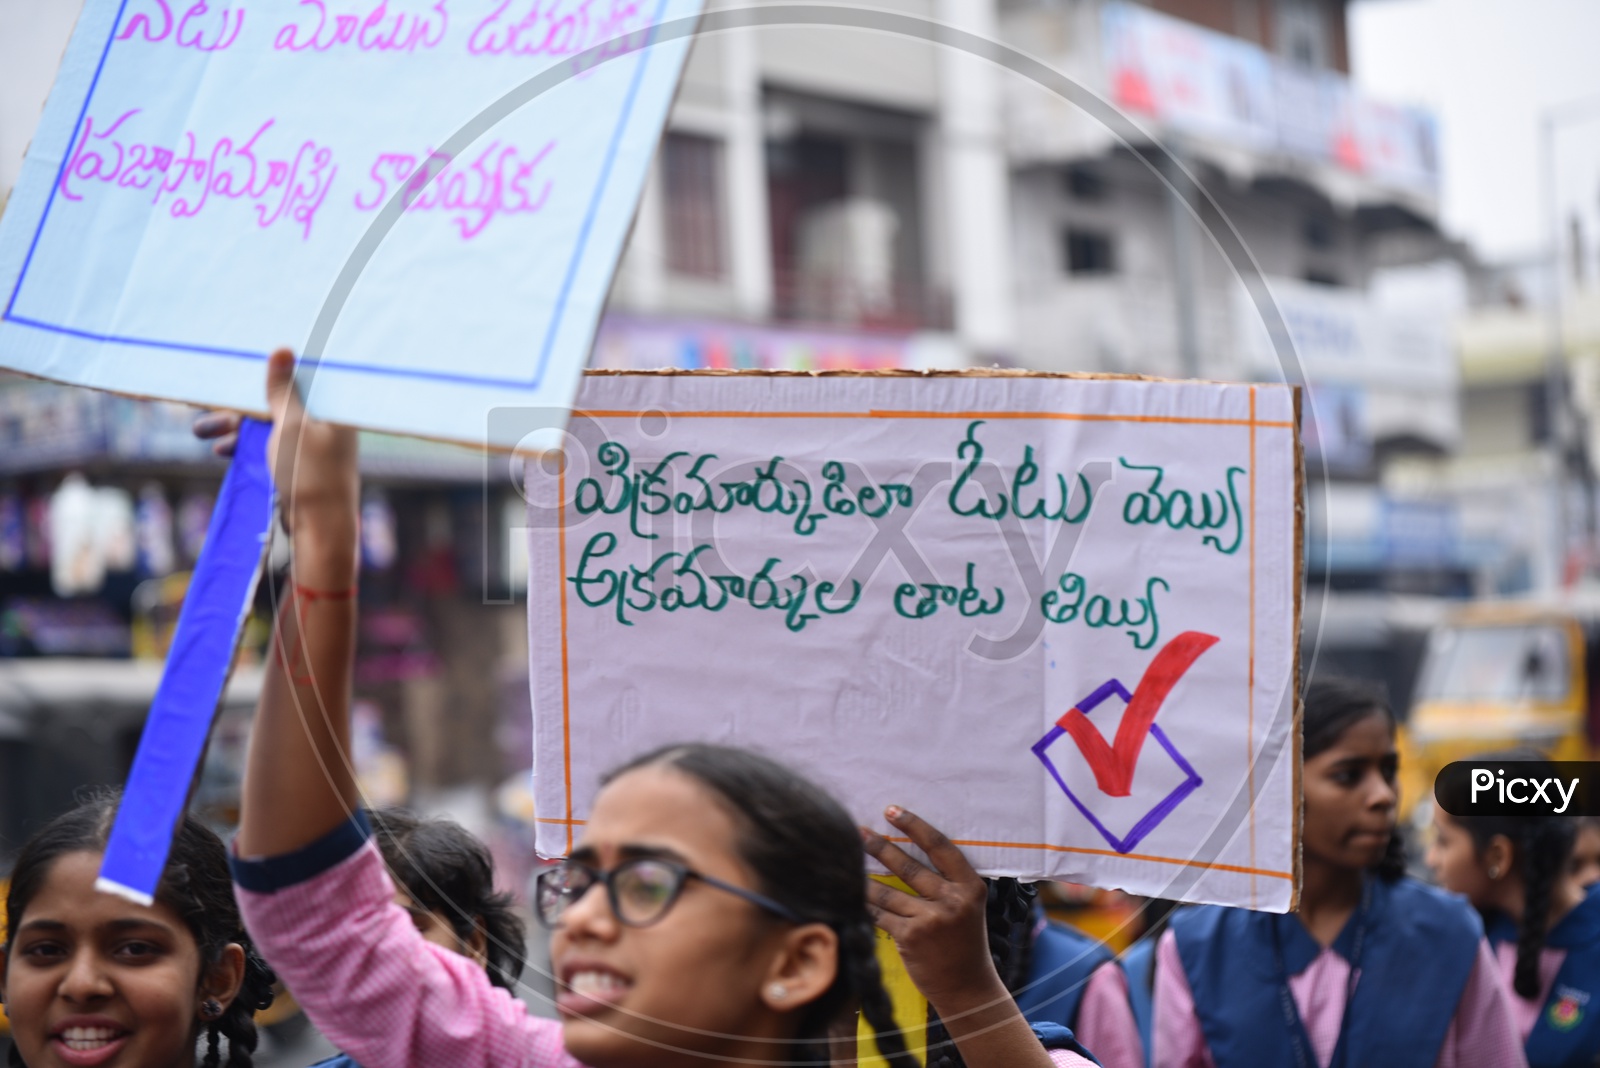 Girl students  showing placards to make use of vote